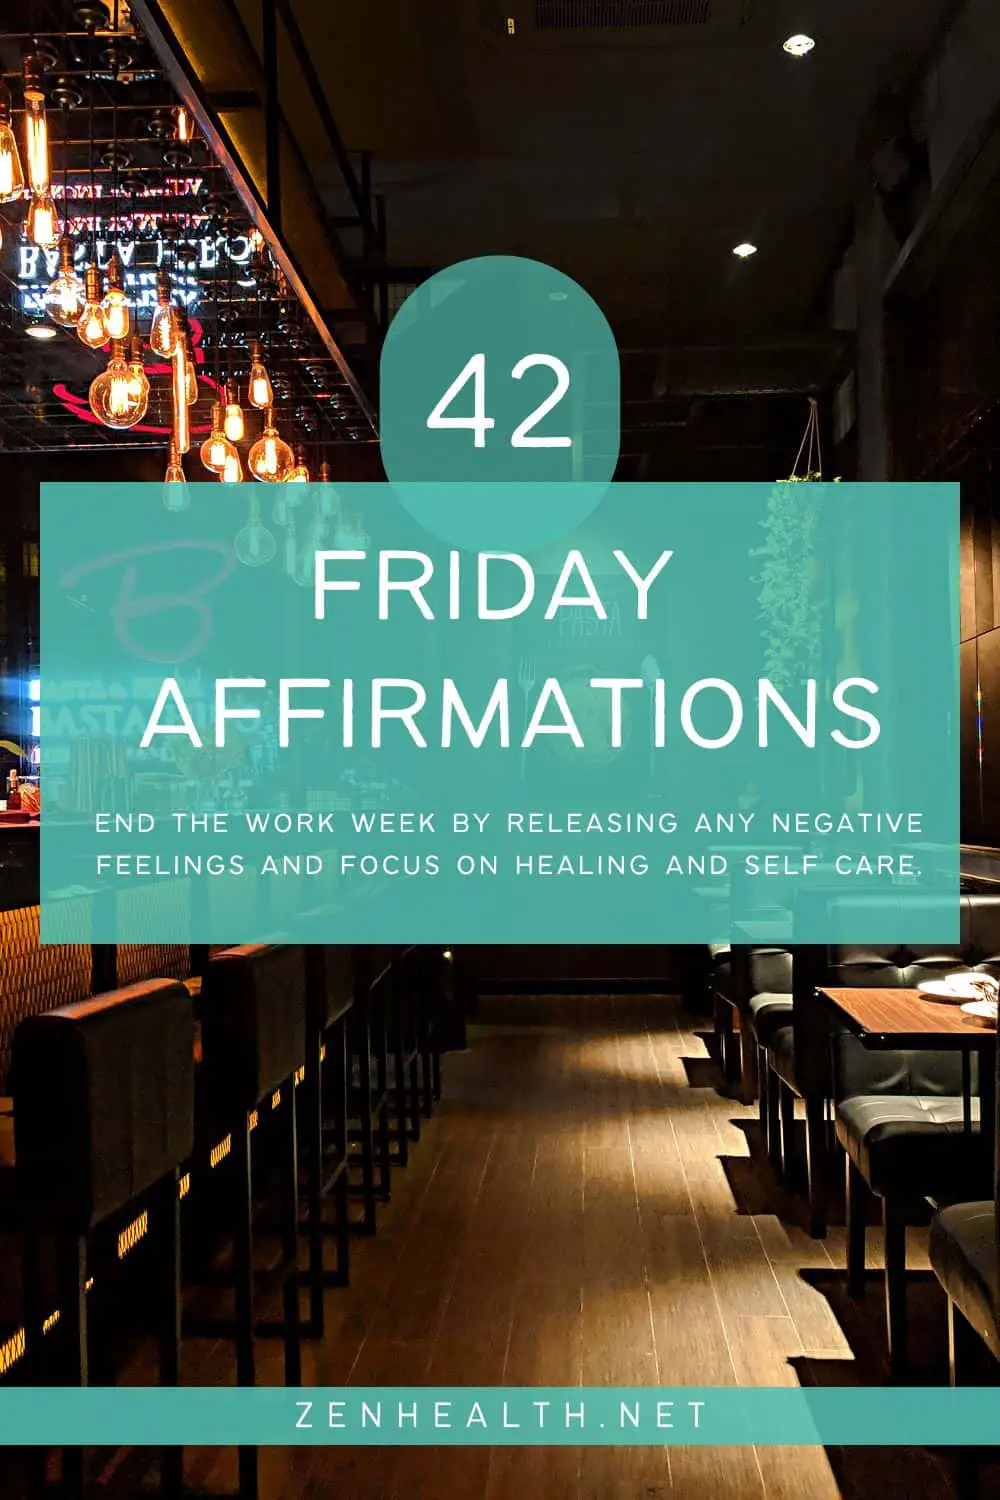 42 friday affirmations: end the work week by releasing any negative feelings and focus on healing and self care